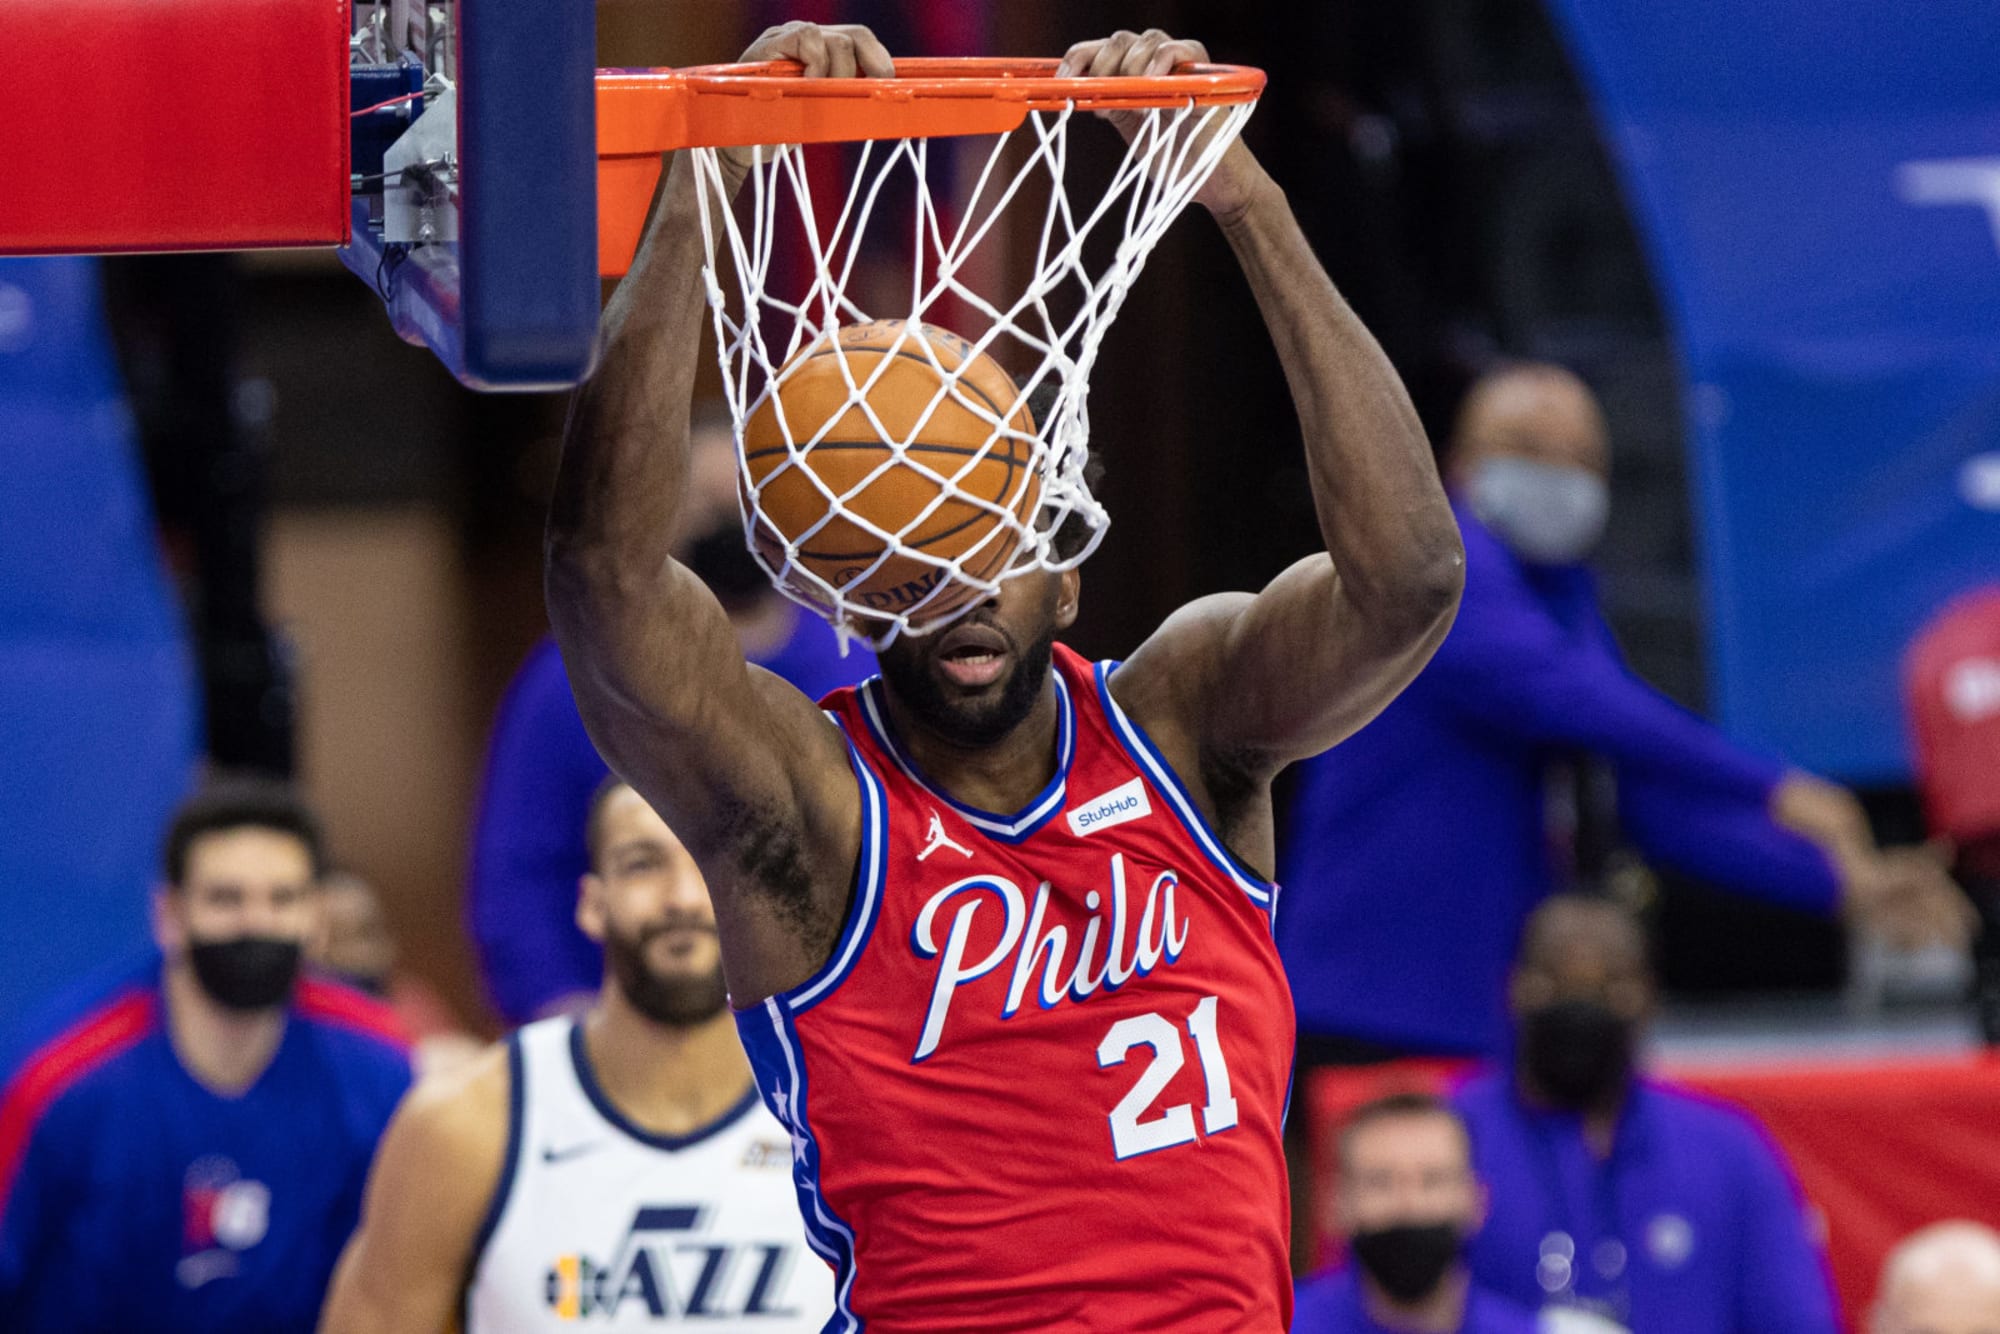 Sixers: The chants of EMVPiid will soon fill the Wells Fargo Center